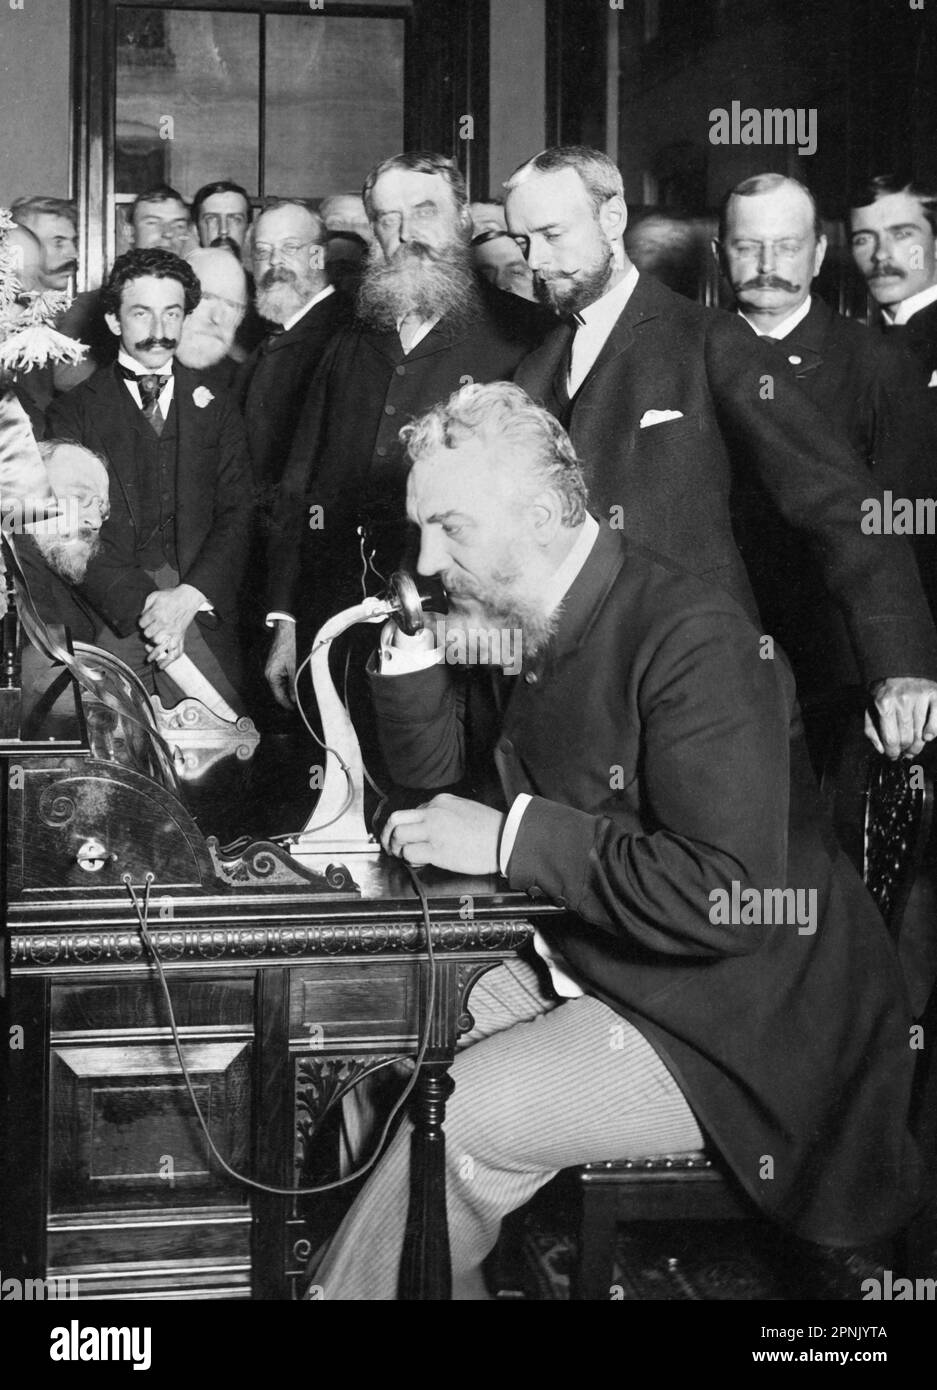 Alexander Graham Bell telephone. Photograph of the Scottish born inventor of the first practical telephone, Alexander Graham Bell (1847-1922), at the opening of the New York and Chicago telephone line in October 1892. Photograph by E J Holmes. Stock Photo